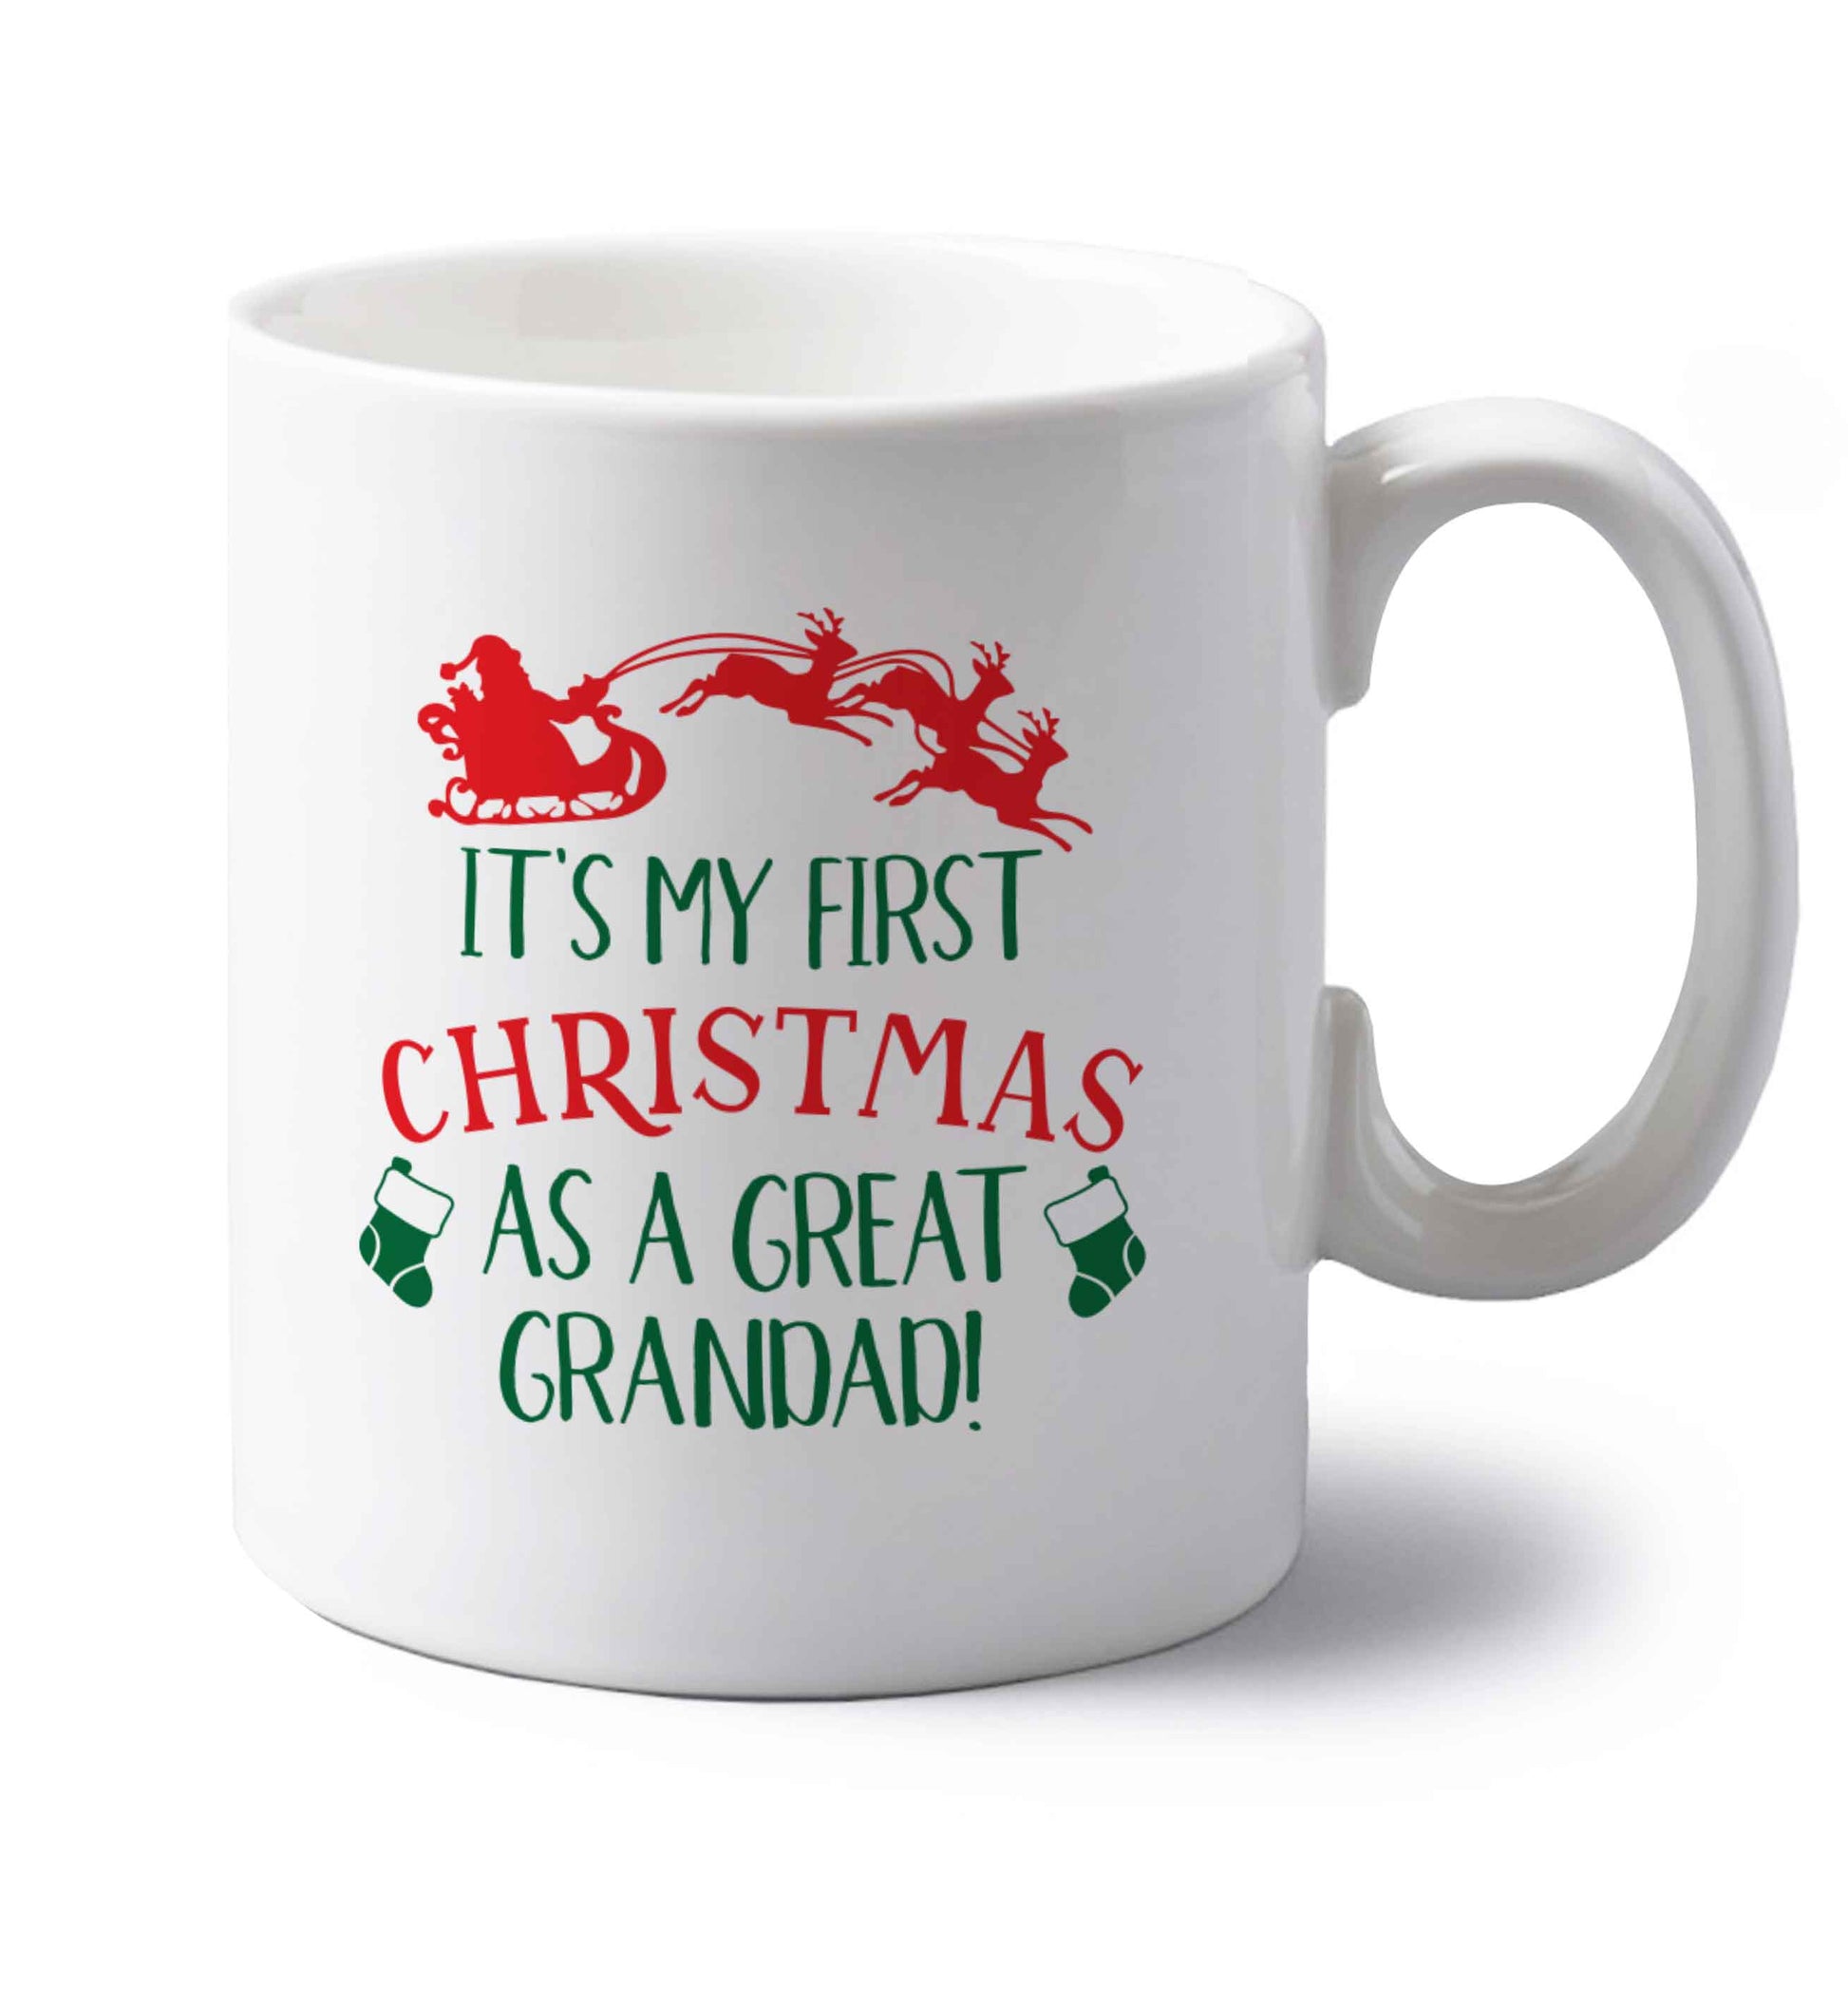 It's my first Christmas as a great grandad! left handed white ceramic mug 